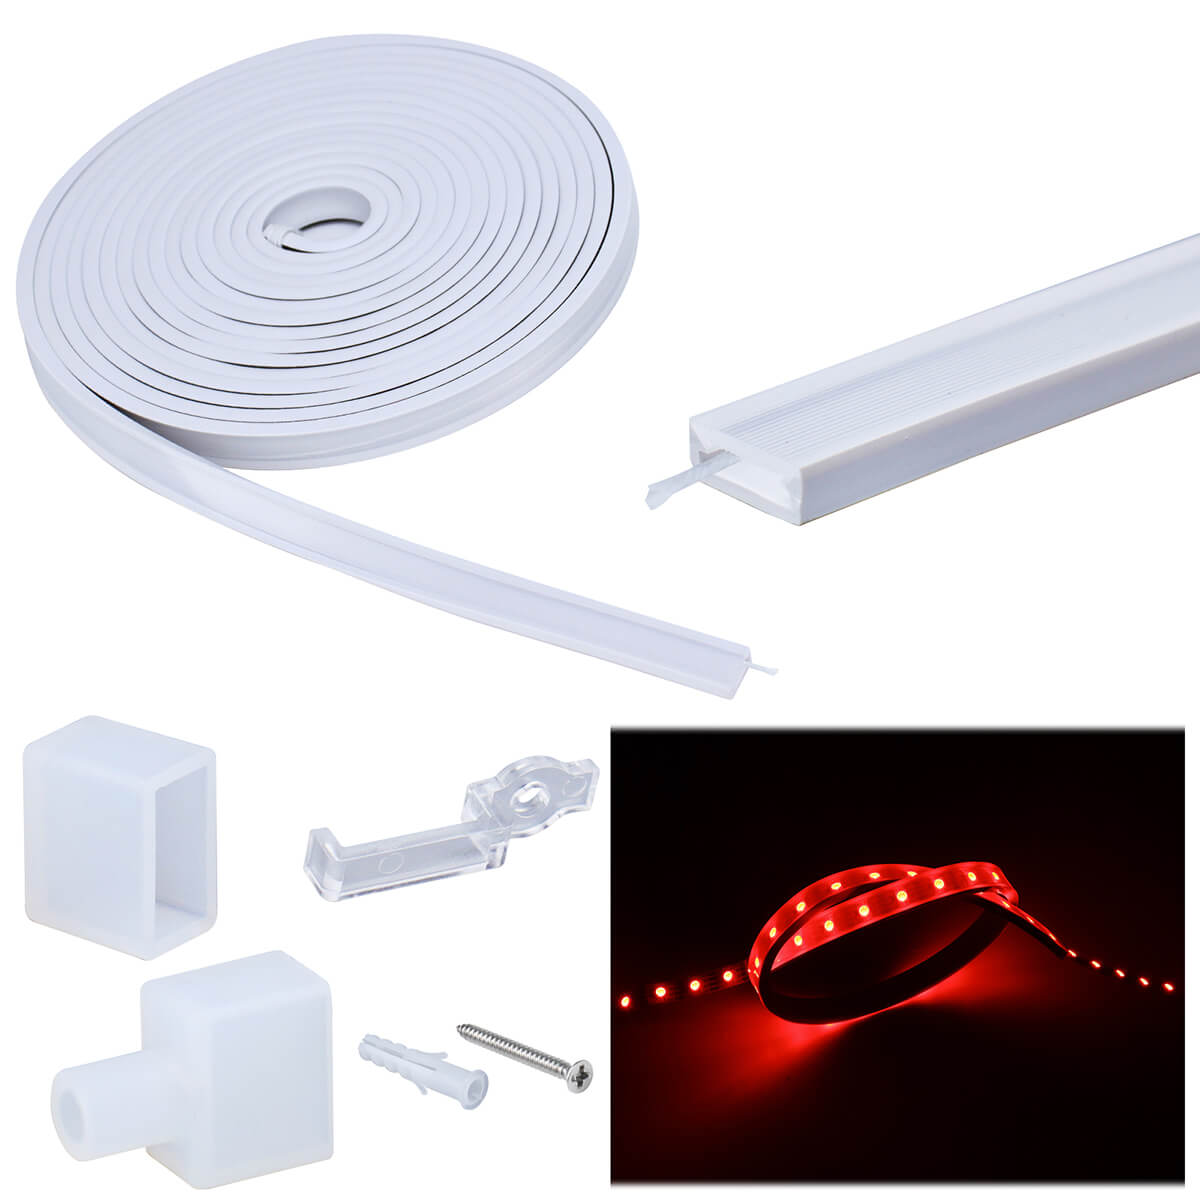 Muzata 33 Feet/10 Meter Silicone LED Channel System Flexible USC1